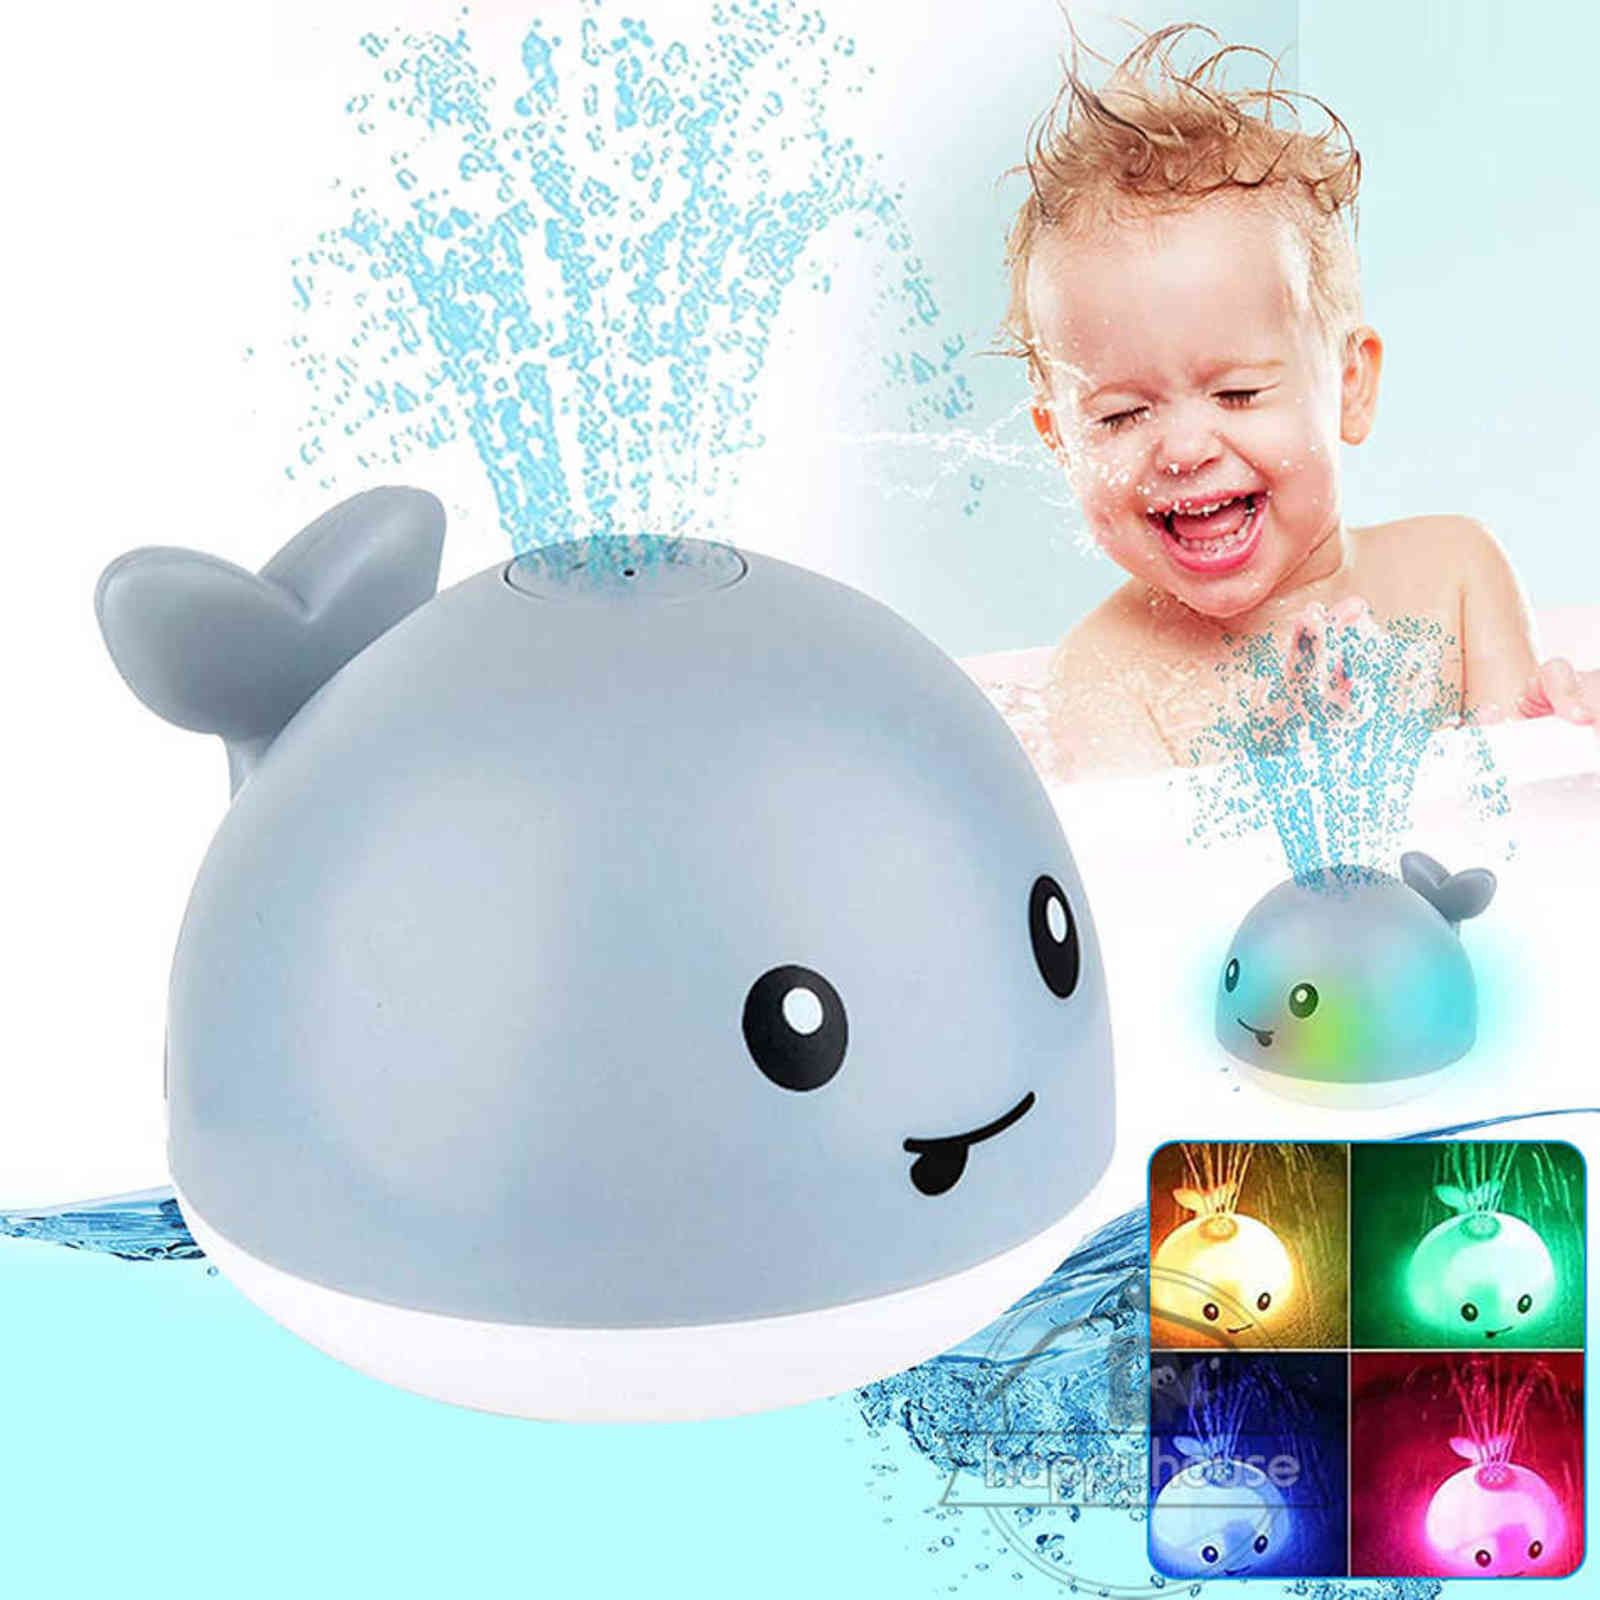 Baby Bath Toys Spray Water Shower Pool Bath Toy for Kids Toys Electric Whale Bath Ball with Light LED Light Baby Toy Bathtub Toy G1201